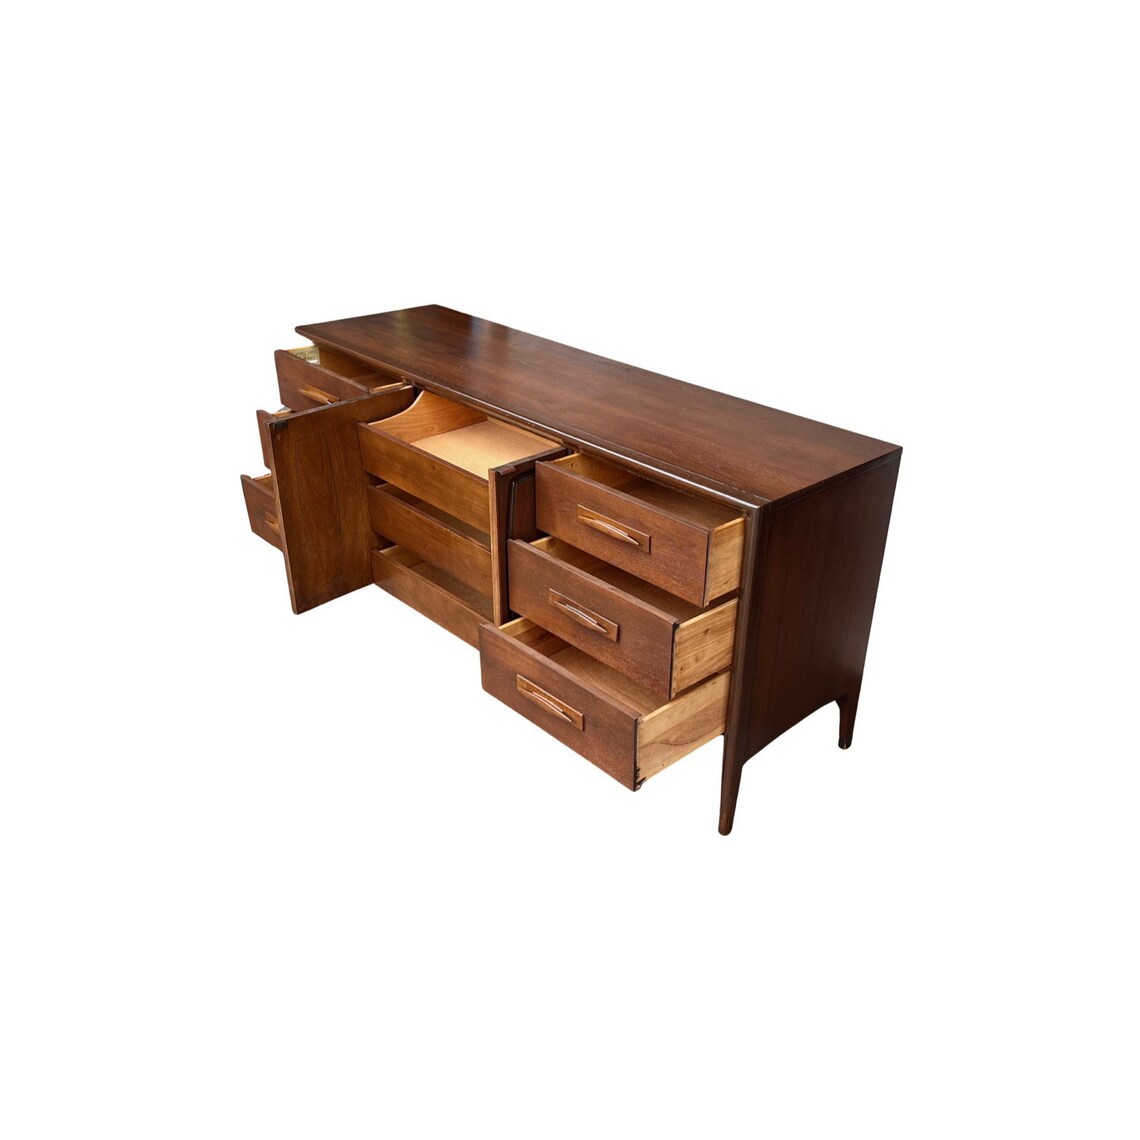 Nine Dovetailed Drawers and Signature Routed Curves - Vintage Broyhill Emphasis Dresser